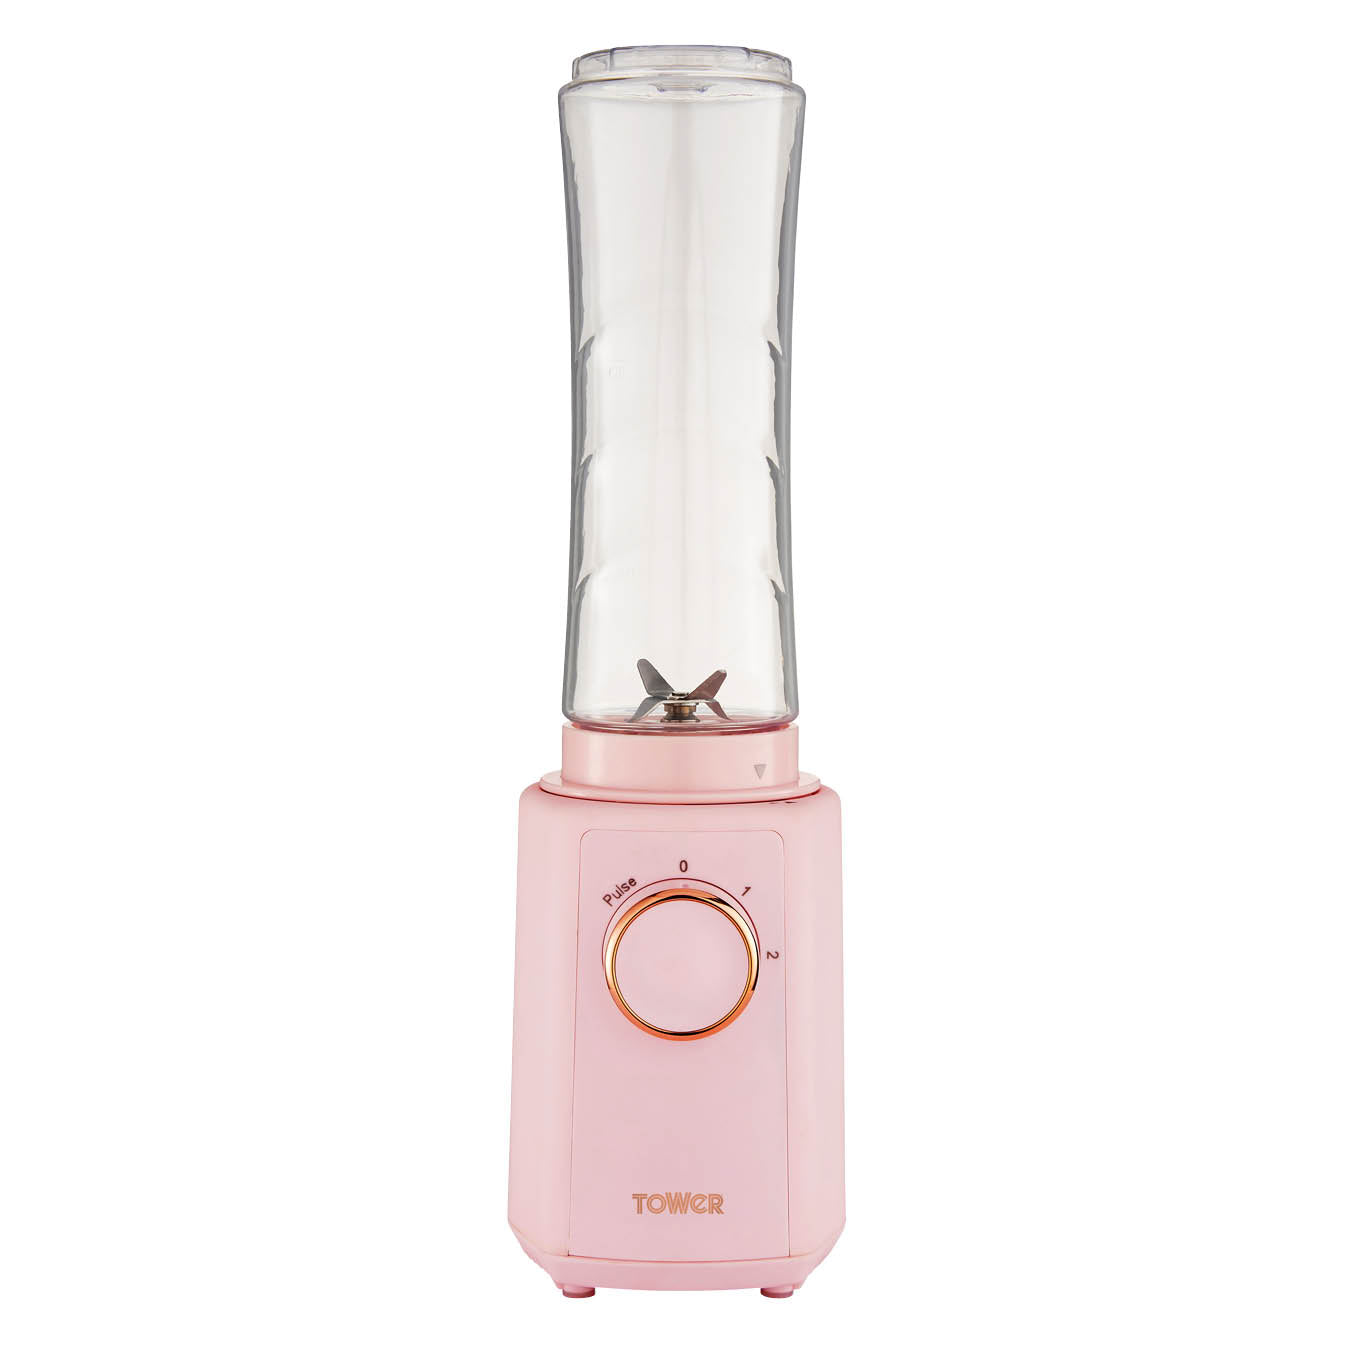 Tower Cavaletto 300W Personal Blender - Pink  | TJ Hughes